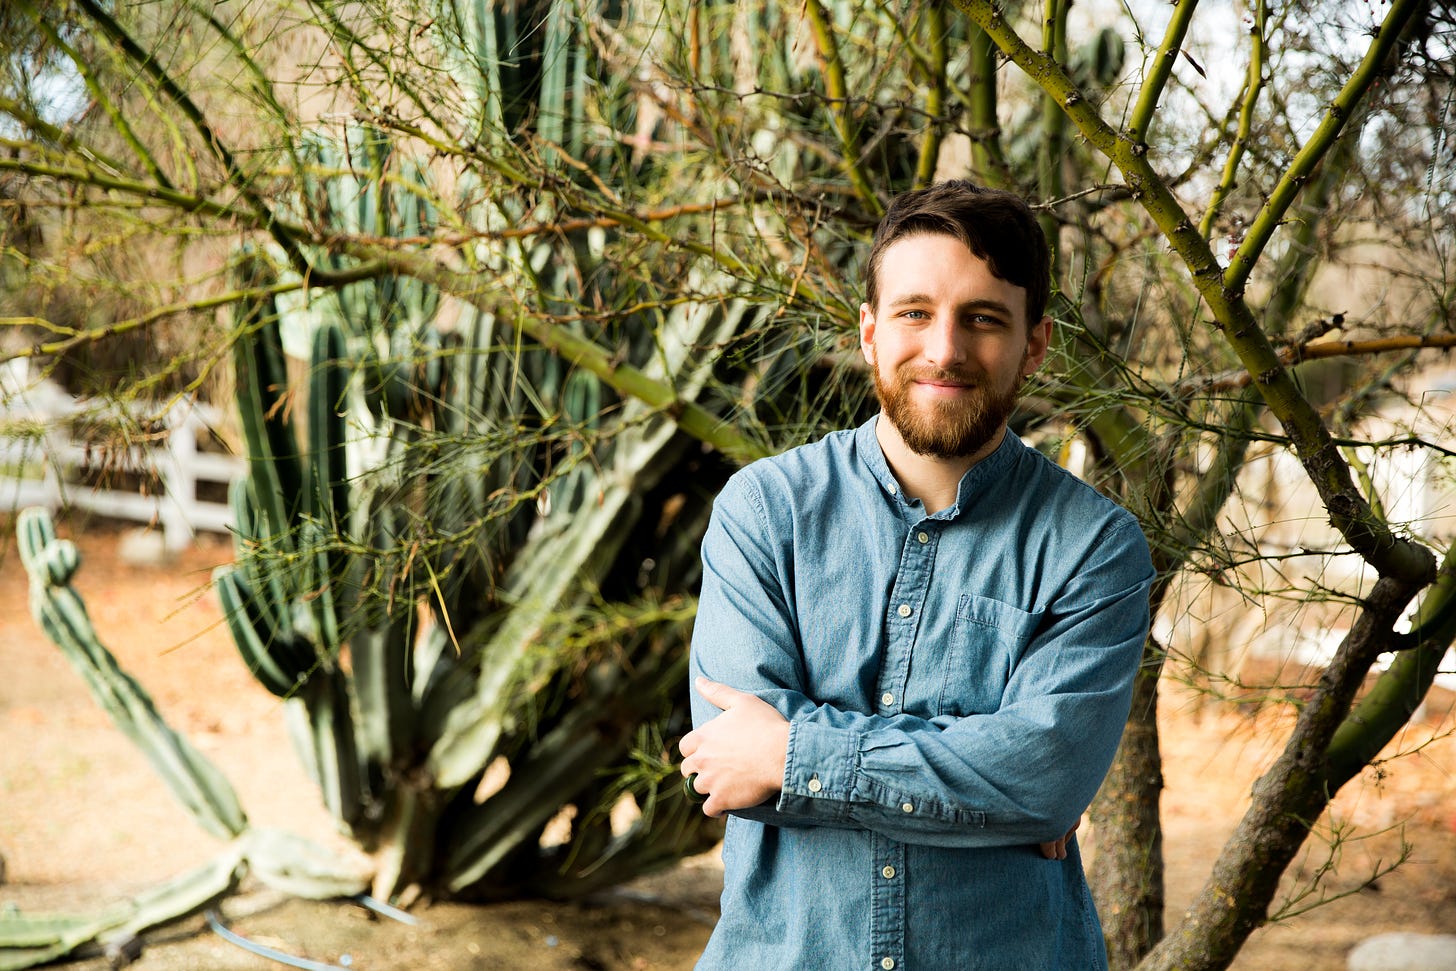 a man stands in front of cactuses and greenery with a smile and arms crossed - a nice picture